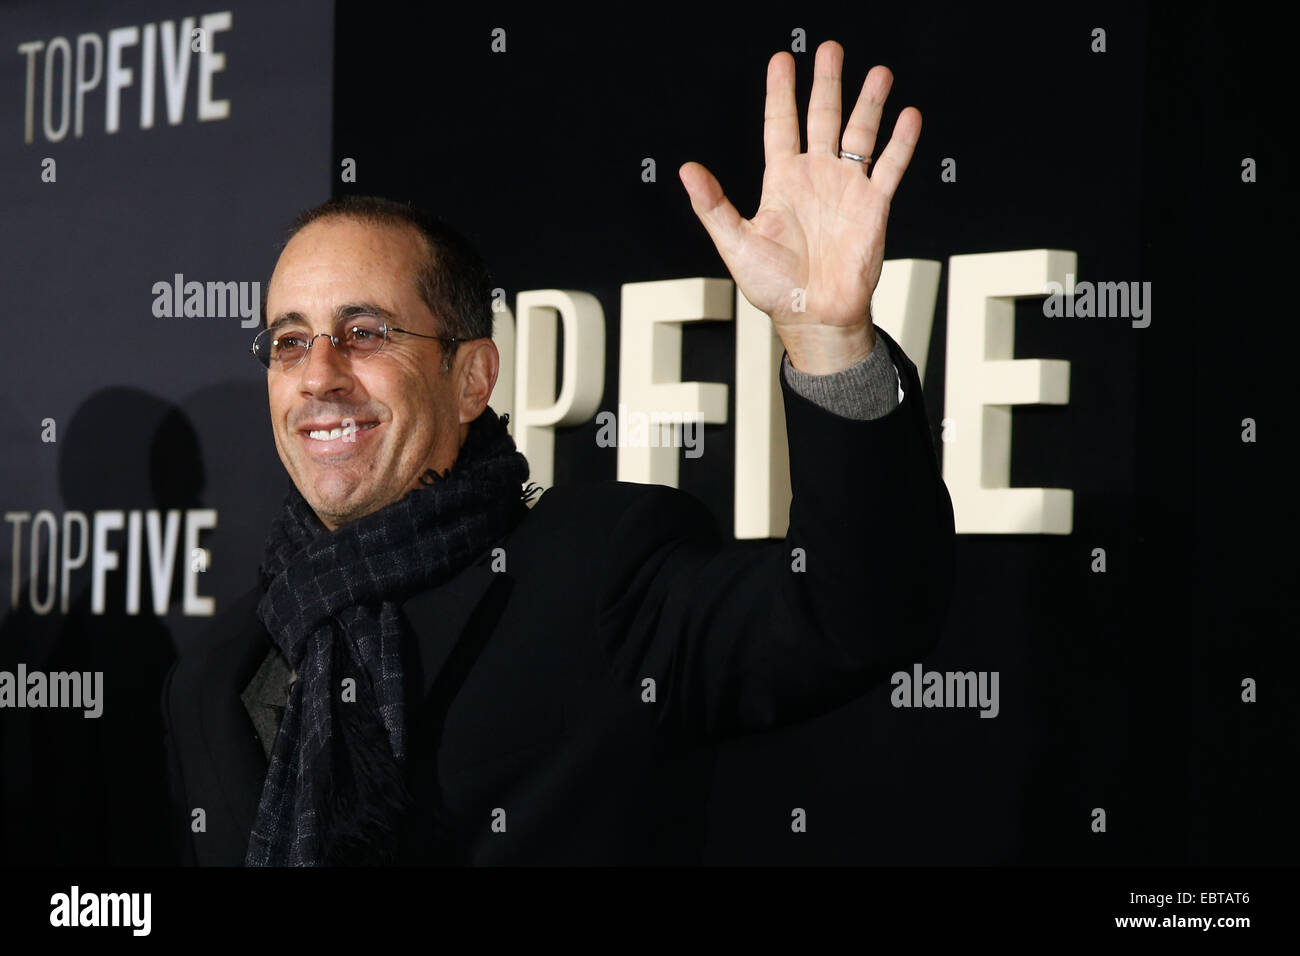 New York, USA. 3rd December, 2014. Comedian Jerry Seinfeld attends the 'Top Five' premiere at the Ziegfeld Theatre on December 3, 2014 in New York City. Credit:  Debby Wong/Alamy Live News Stock Photo